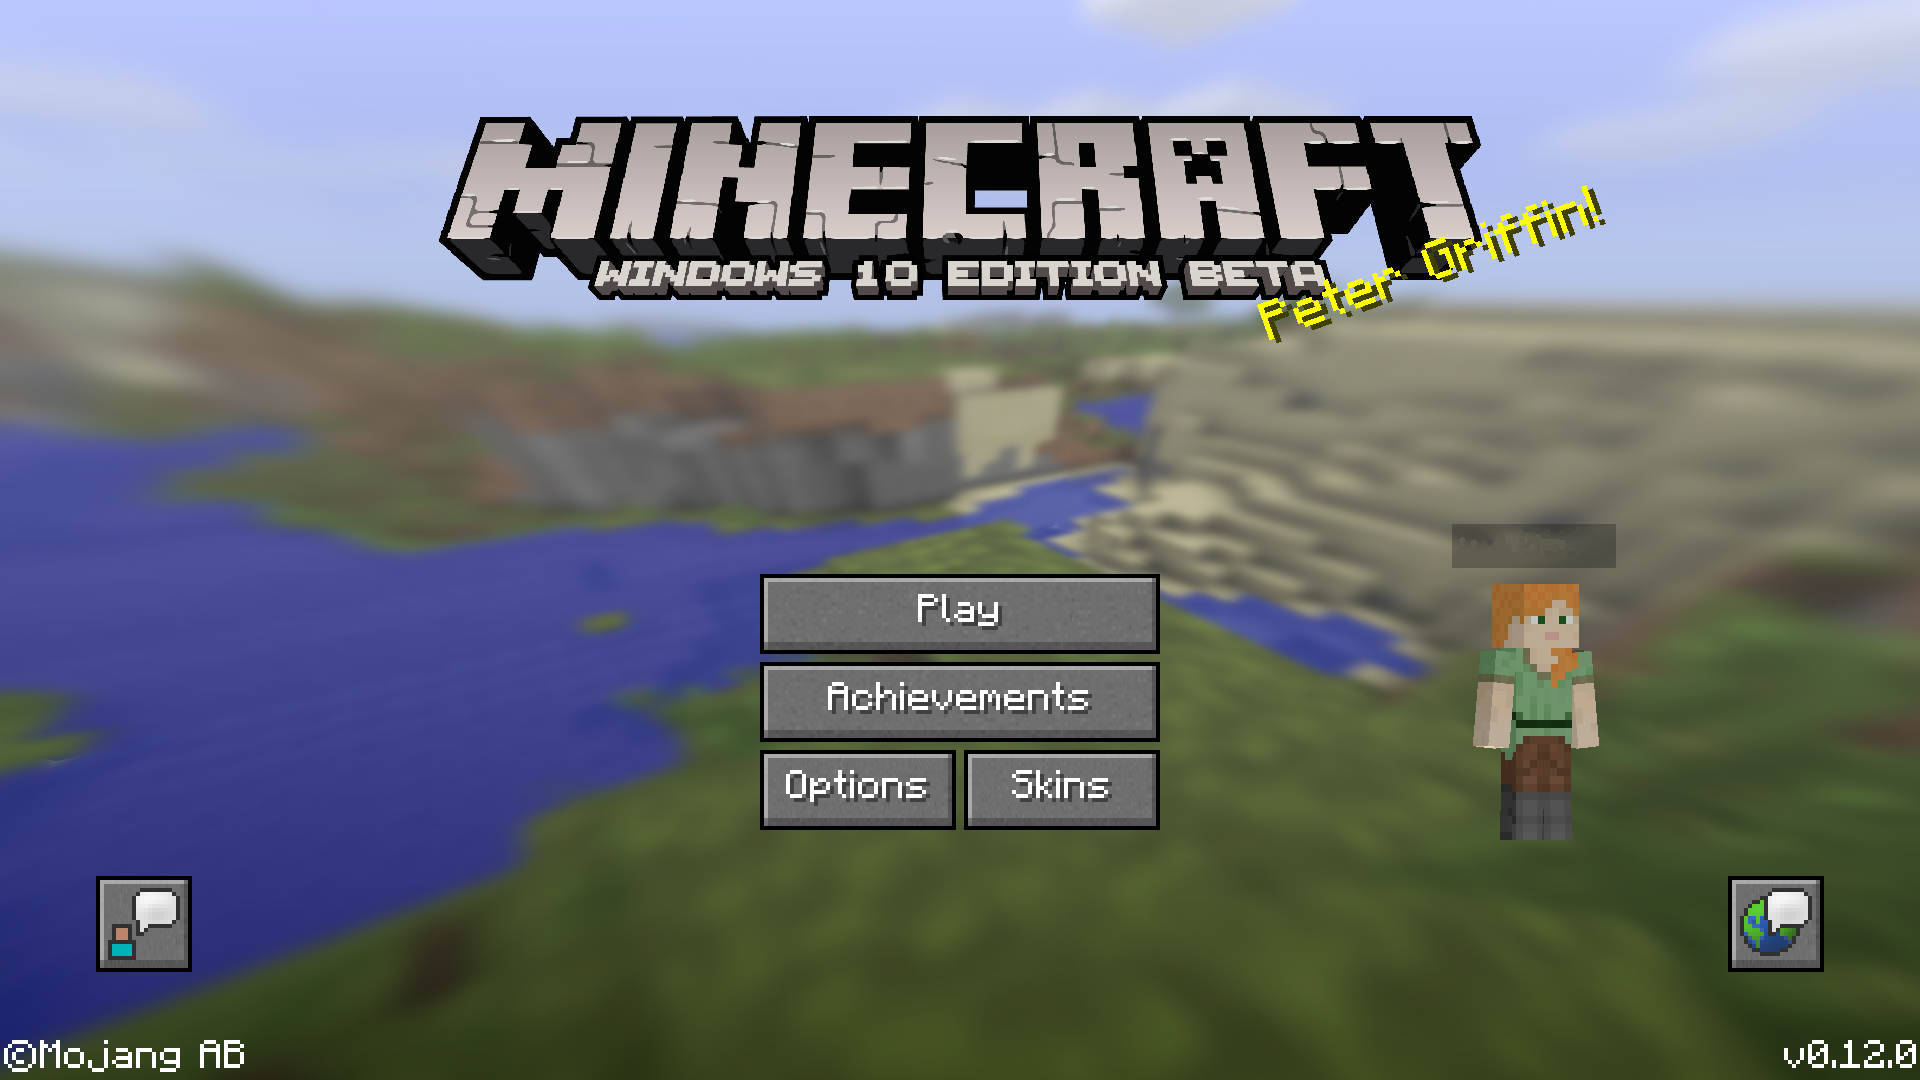 Why is the Pocket Edition beta like this? black and white? is this